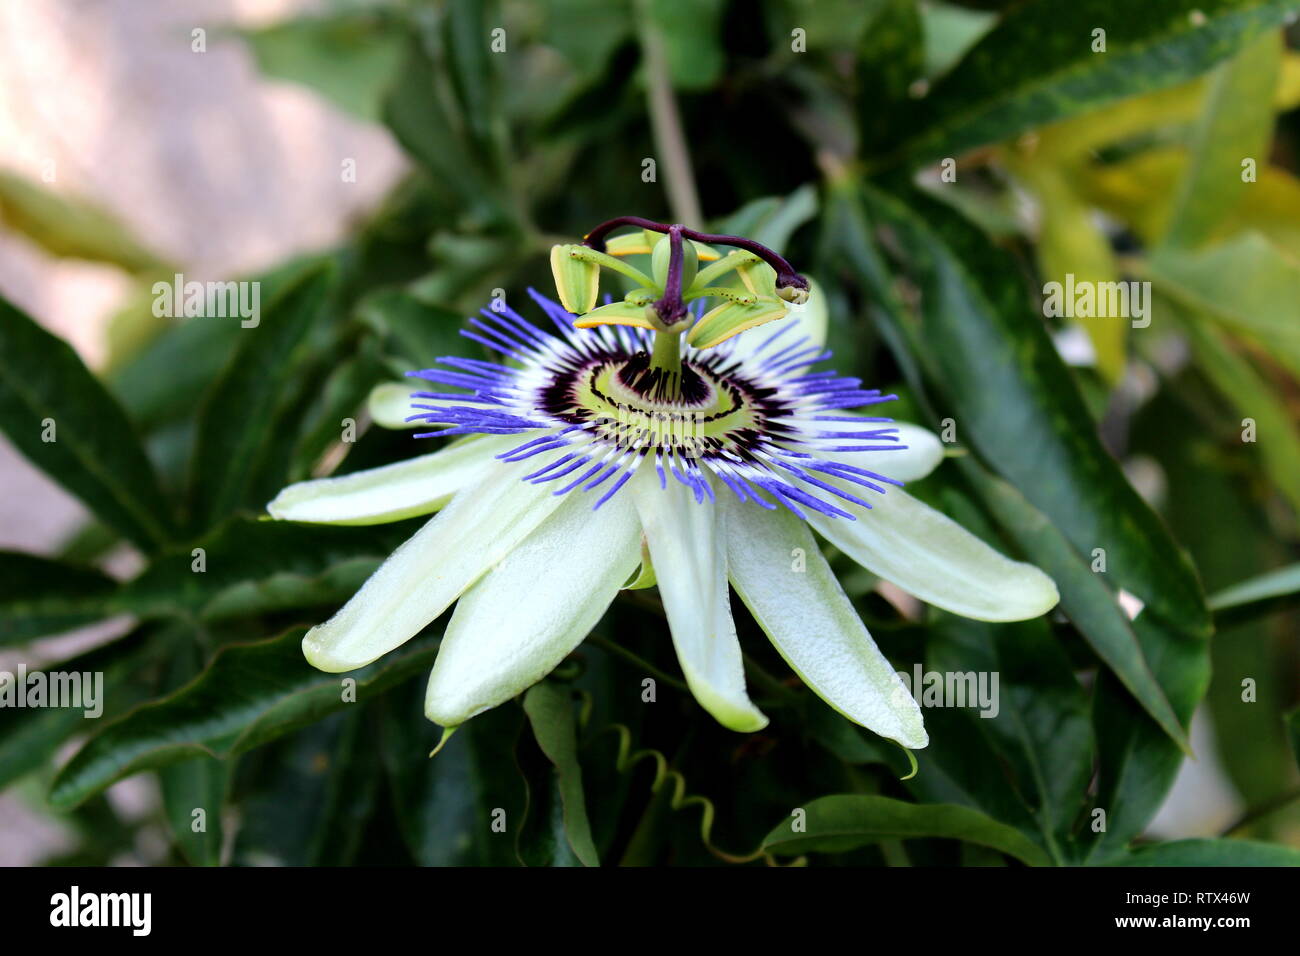 Open blooming beautiful unusual Passion fruit or Passiflora edulis or Maracuja or Parcha or Grenadille or Fruit de la passion flower Stock Photo